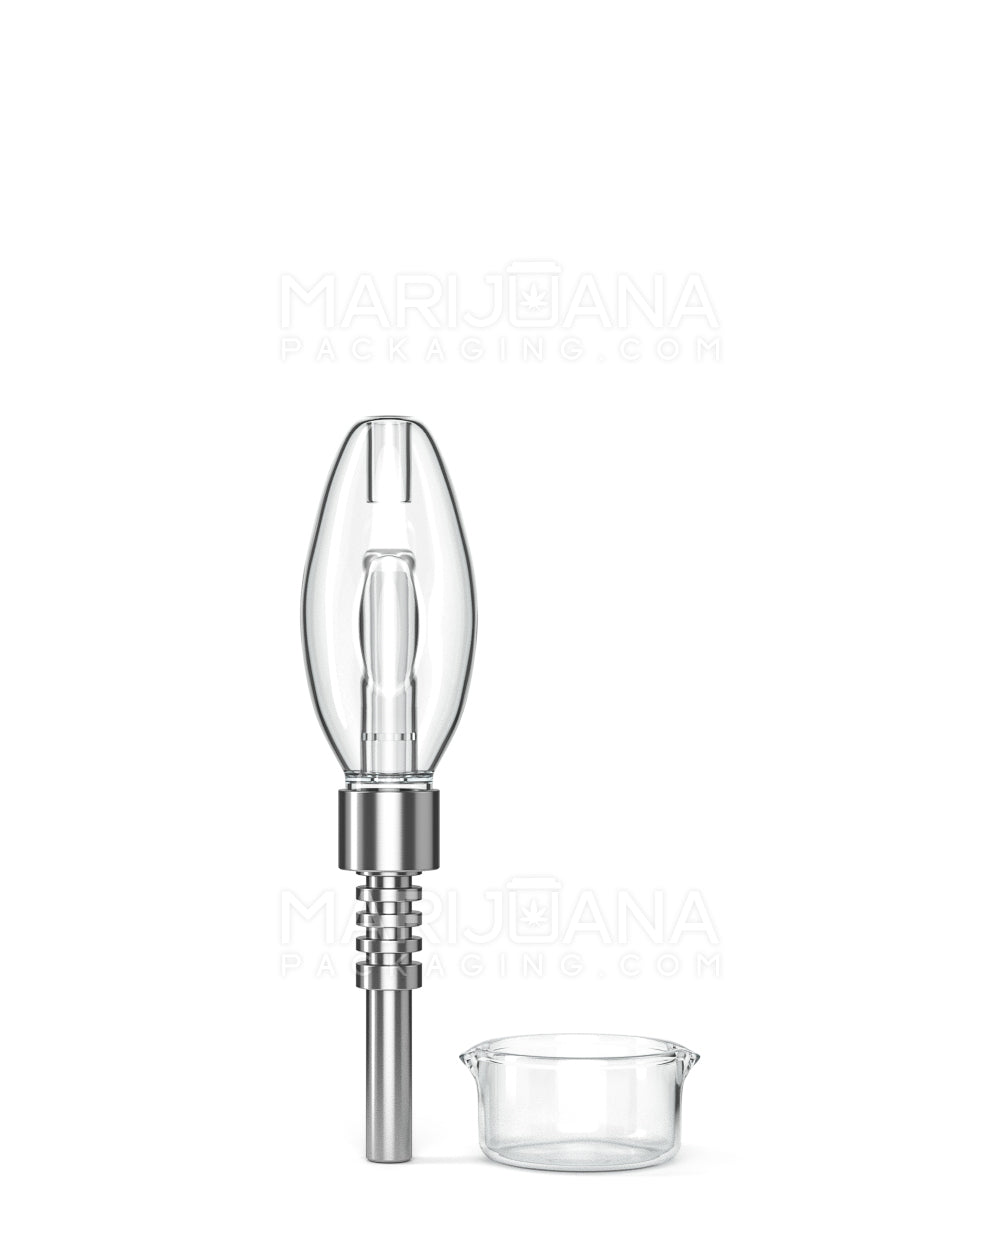 Nectar Collector Dab Pipe w/ Titanium Tip | 5.5in Long - 14mm Attachment - Clear - 1